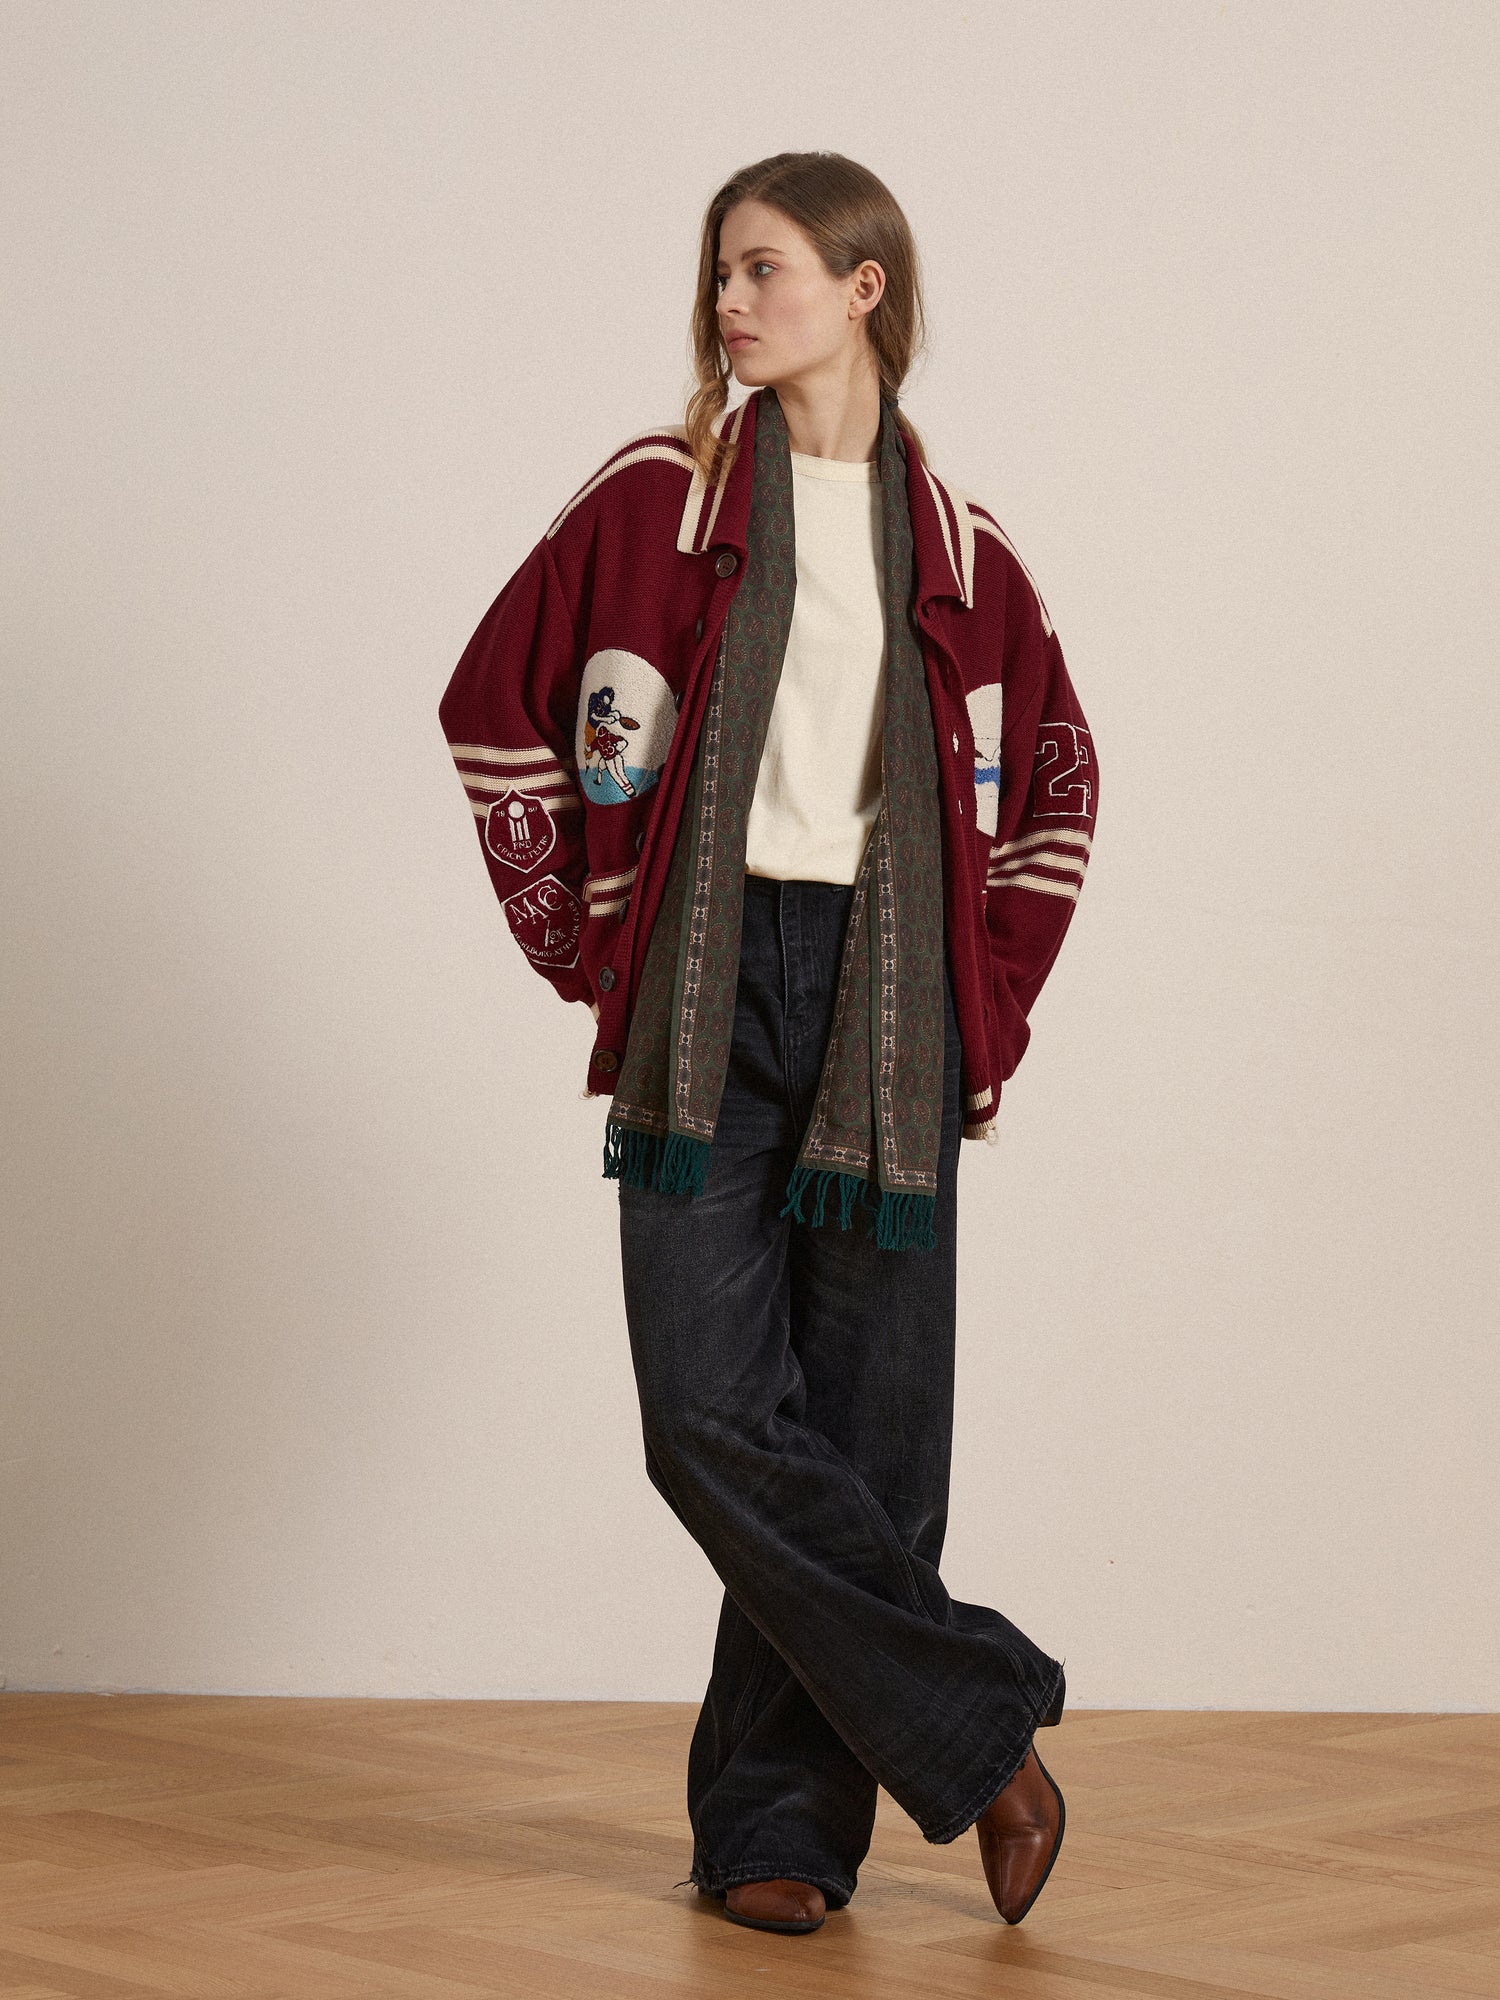 A woman wearing a burgundy Found Fin Varsity Patch Collared cardigan and scarf, adorned with embroidered chenille patches.